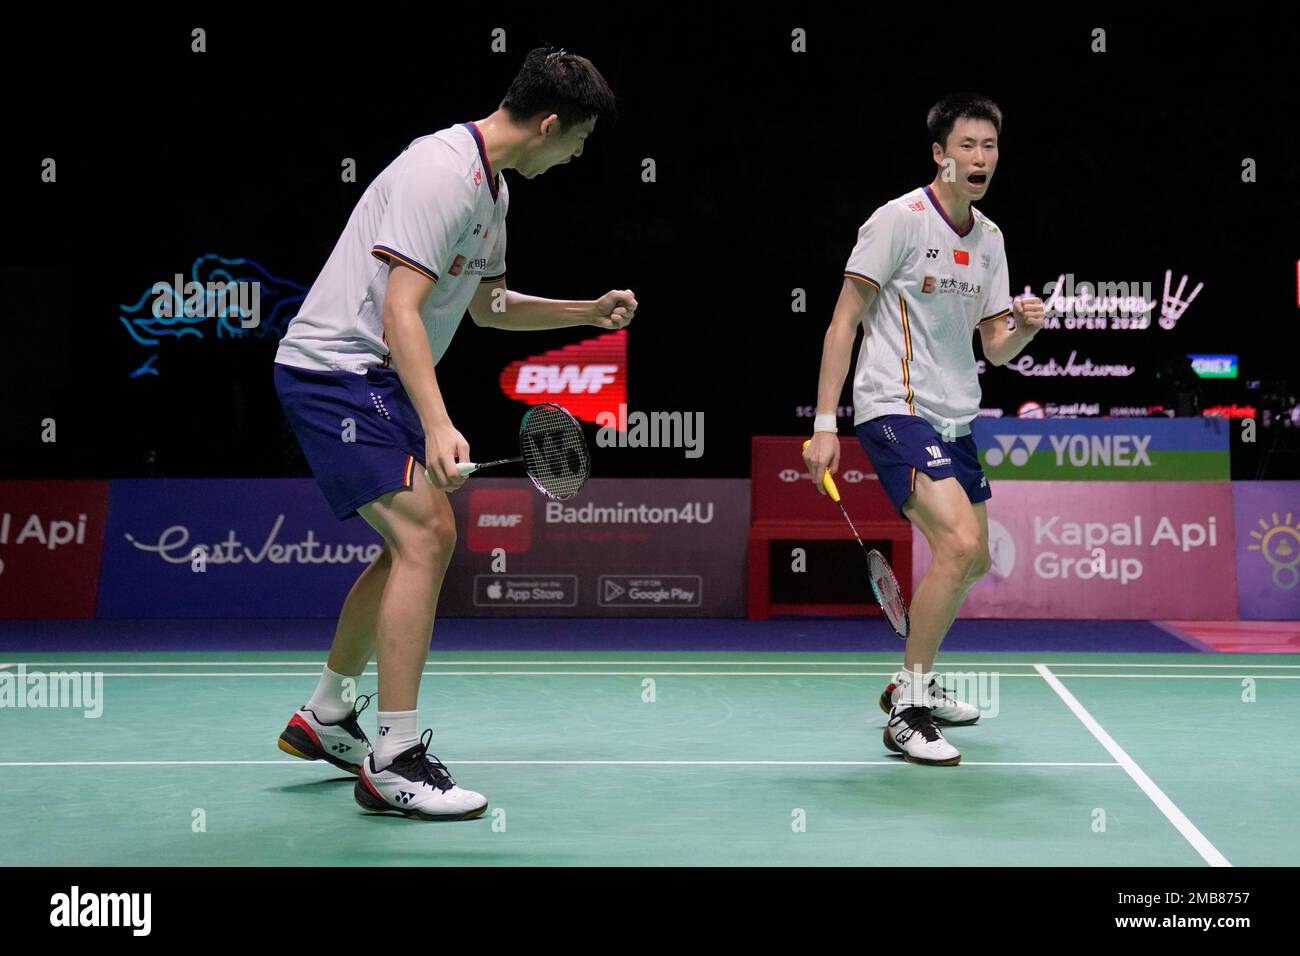 Chinas Liu Yu Chen, left, and Ou Xuan Yi celebrate after scoring a point against Malaysias Aaron Chia and Soh Wooi Yik during their mens doubles semifinal match at Indonesia Open badminton